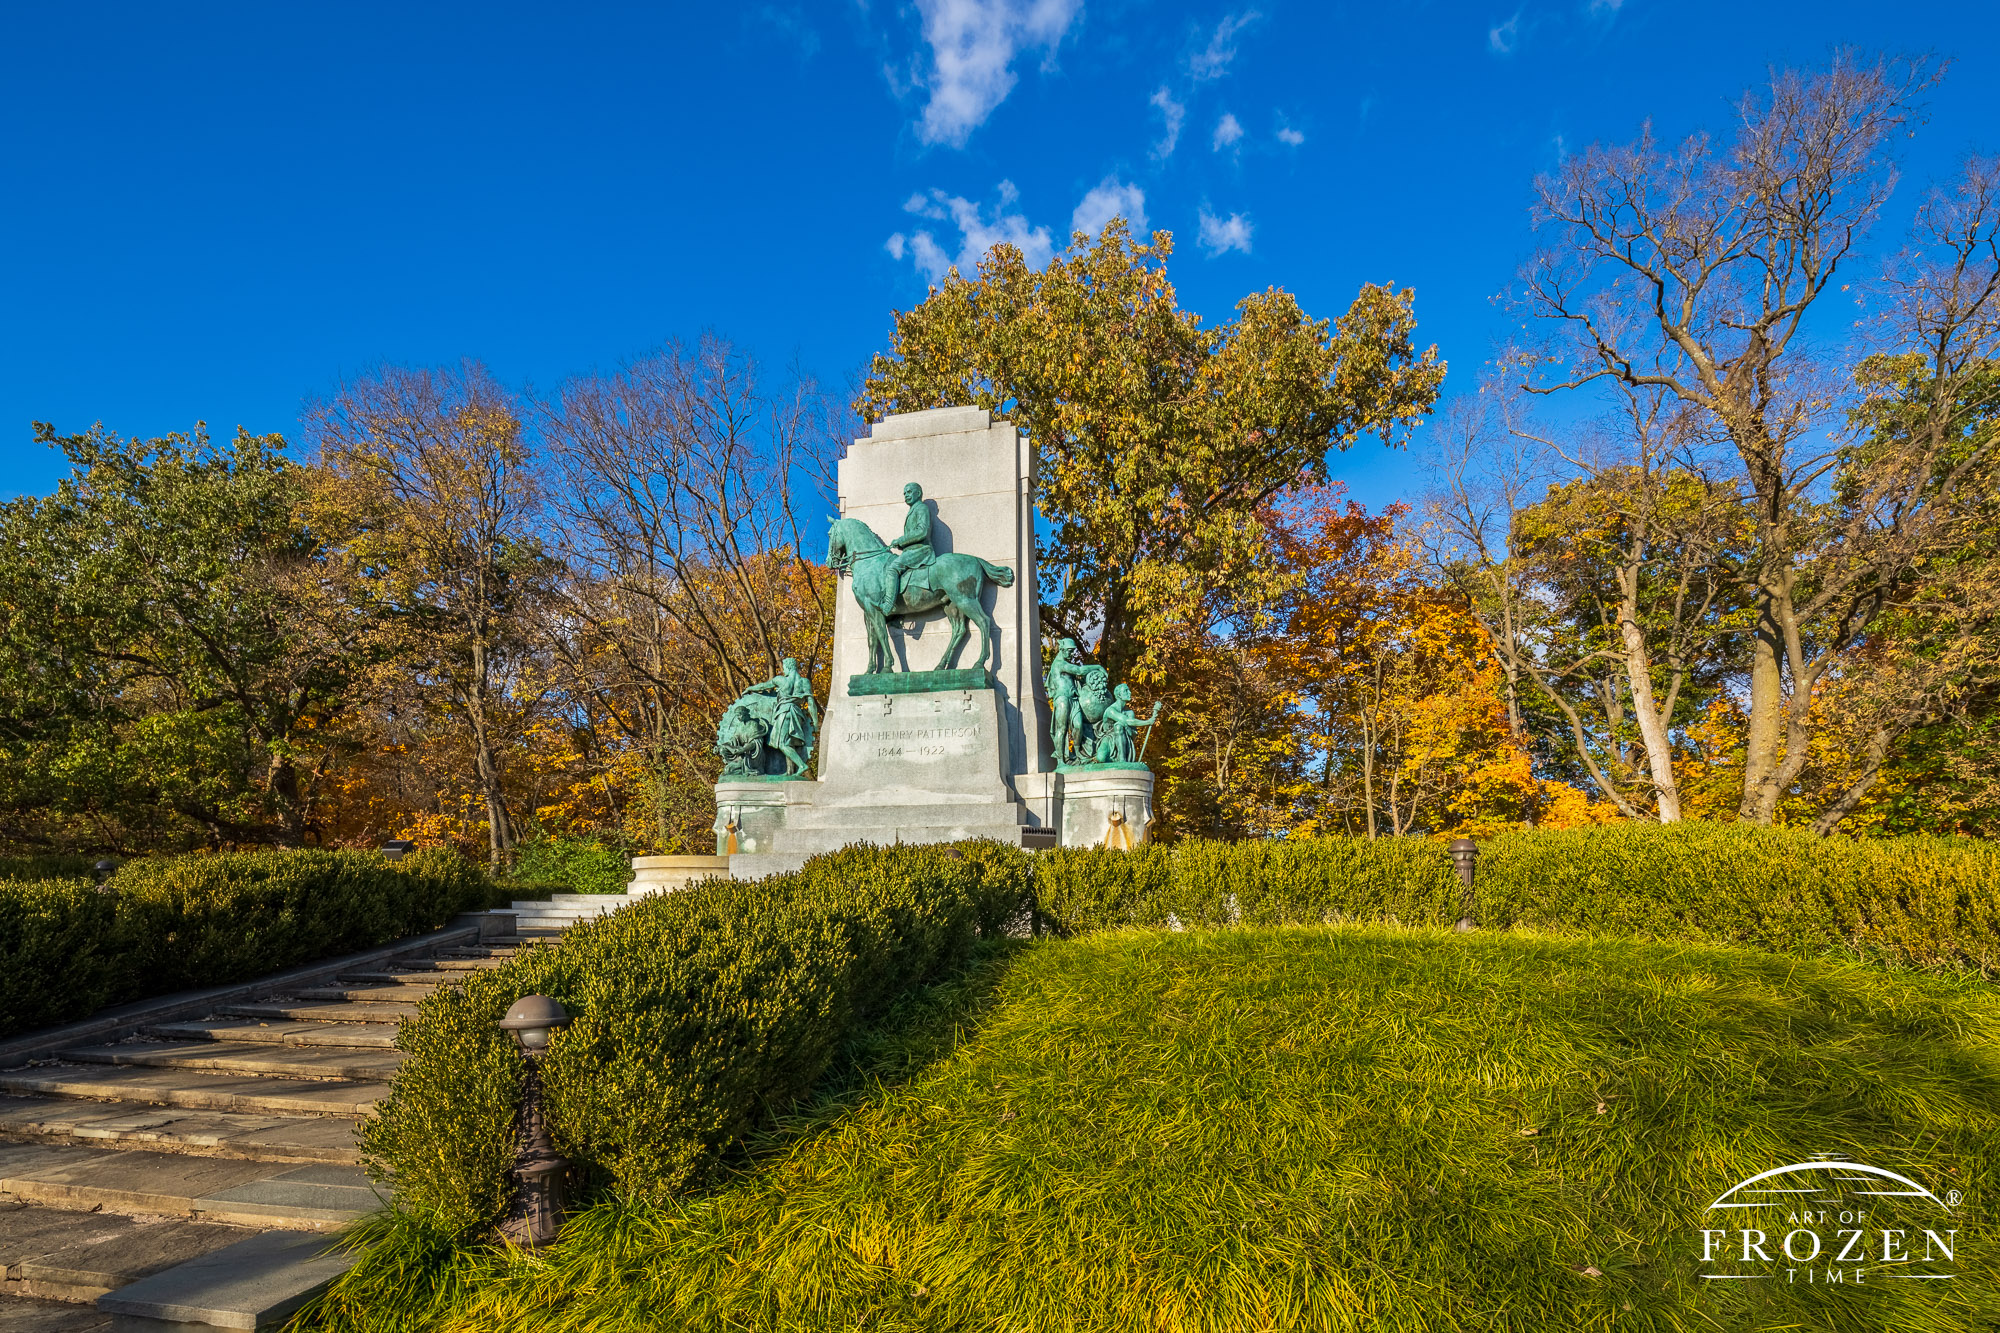 A equestrian style memorial for John H. Patterson stands under blue skies on a hill surrounded by autumn-colored trees